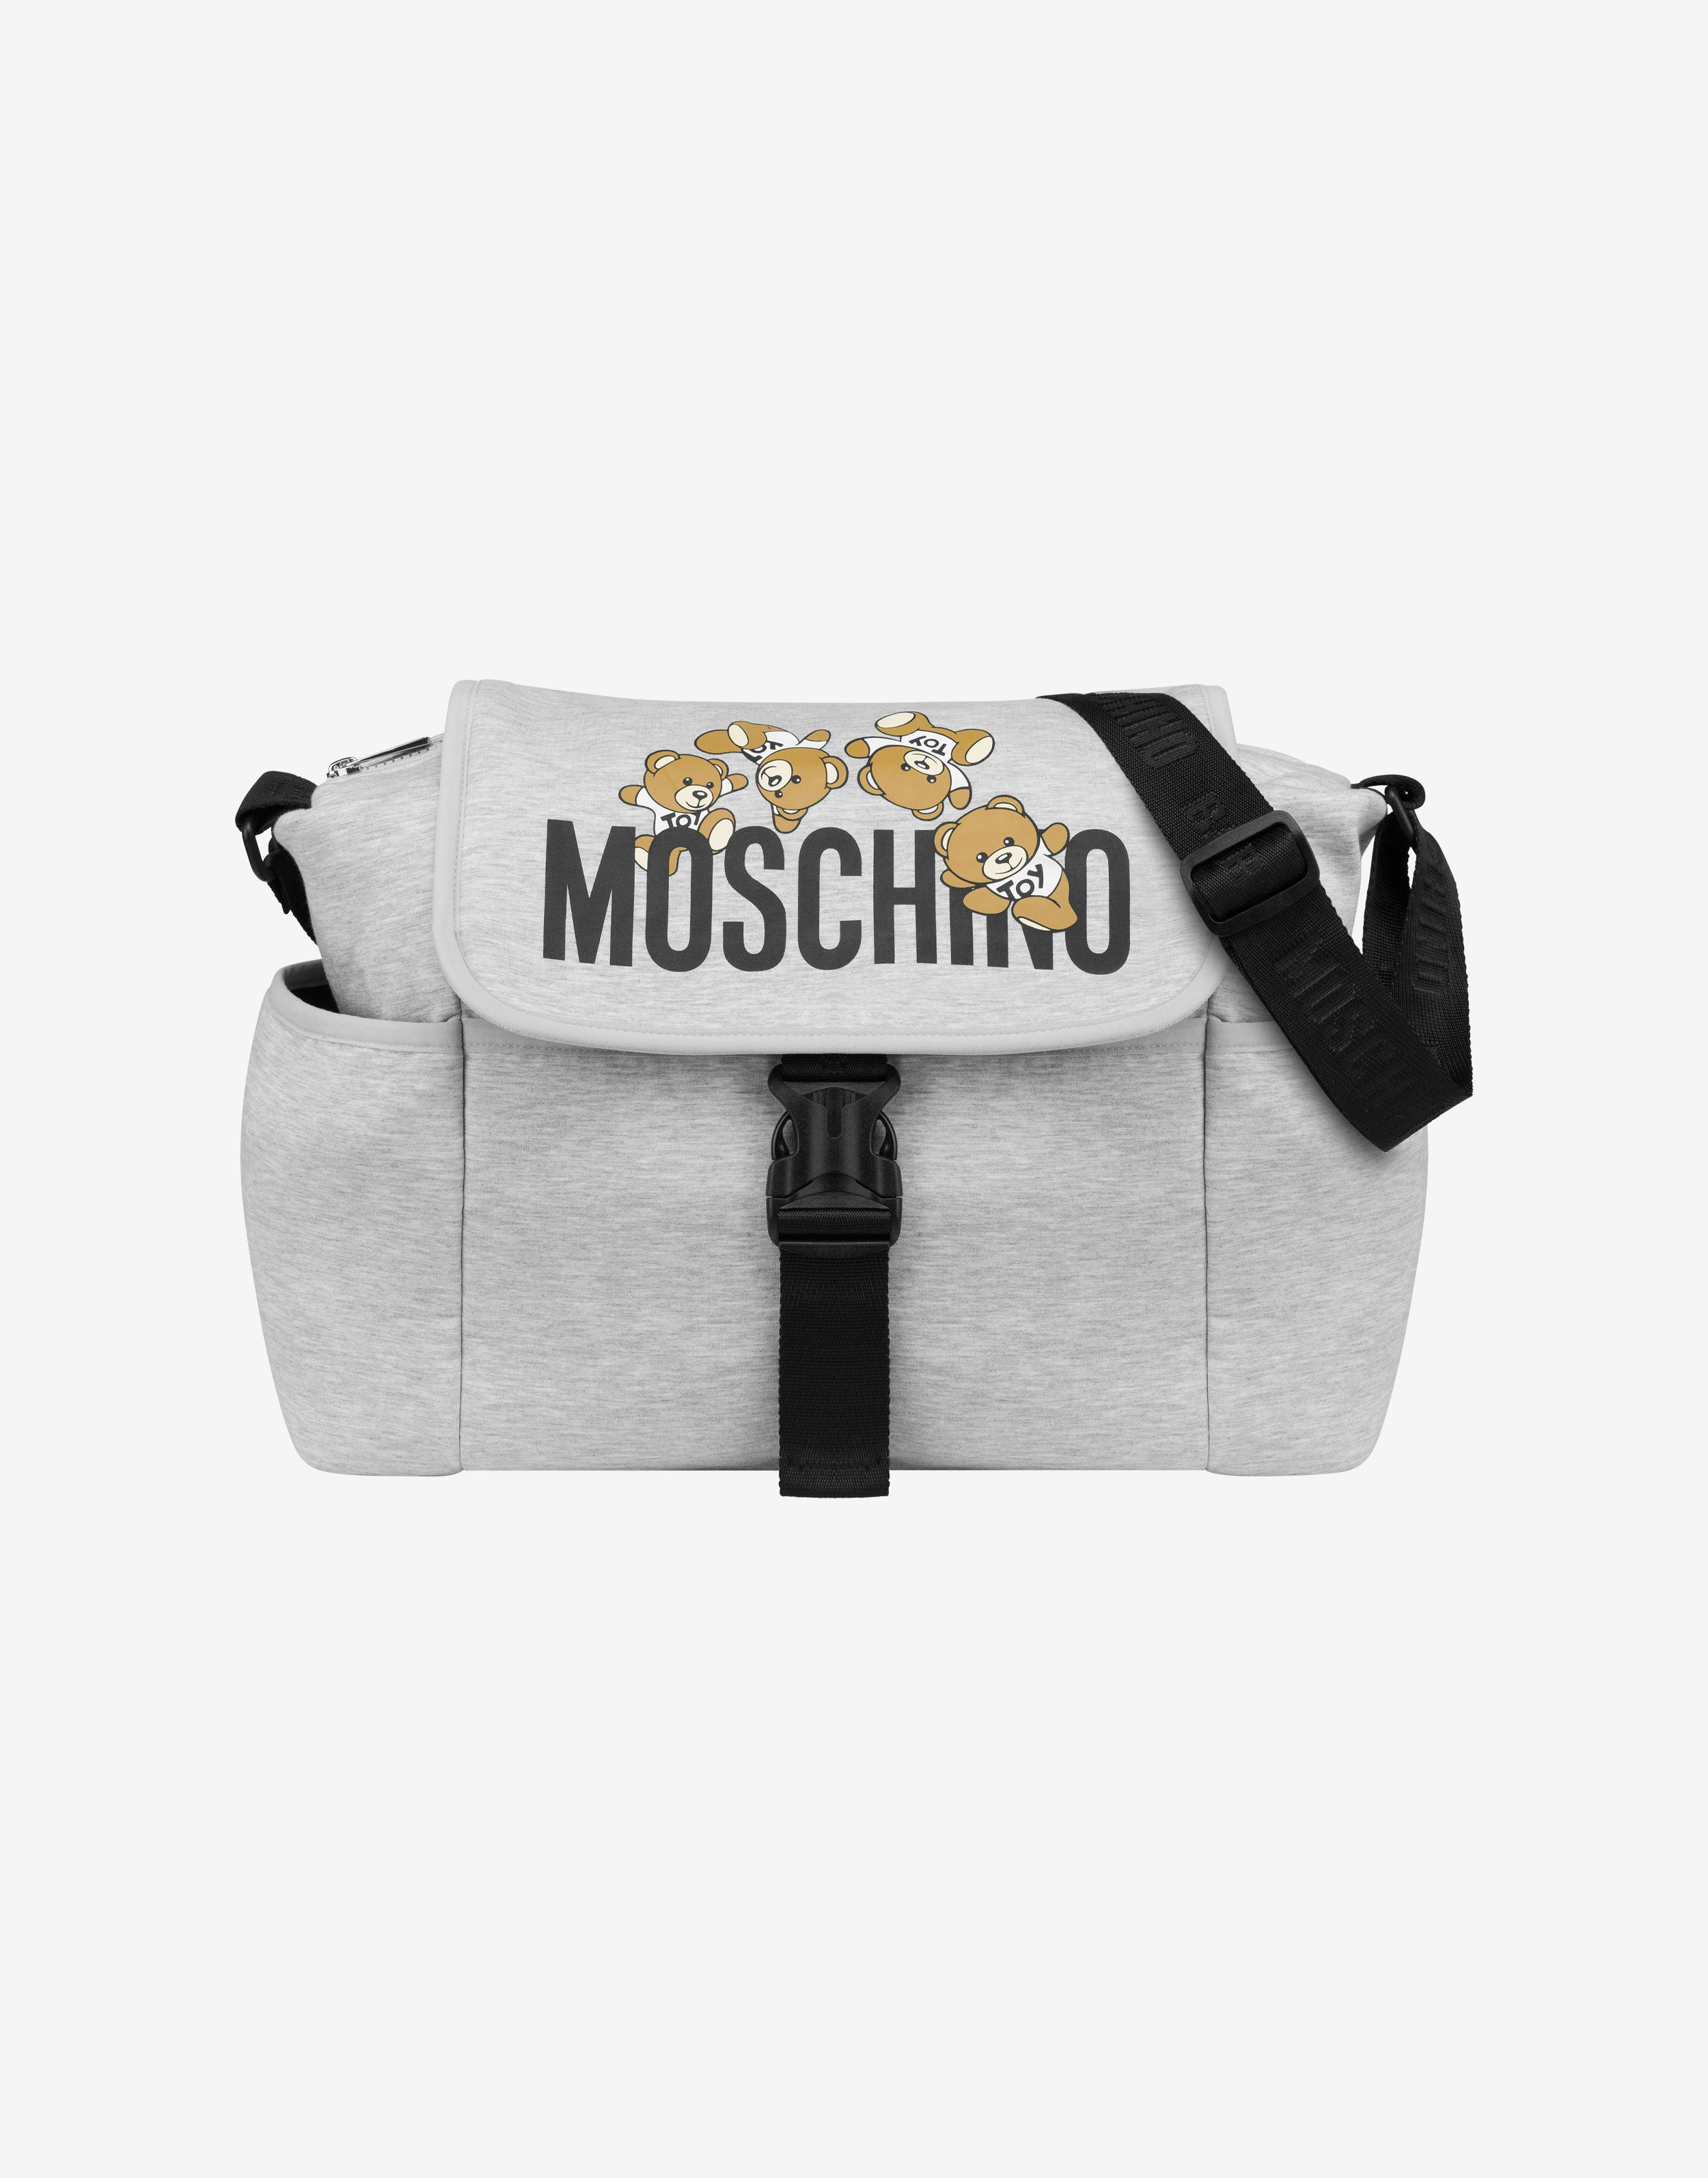 Moschino ベビー用品 for キッズ - Official Store